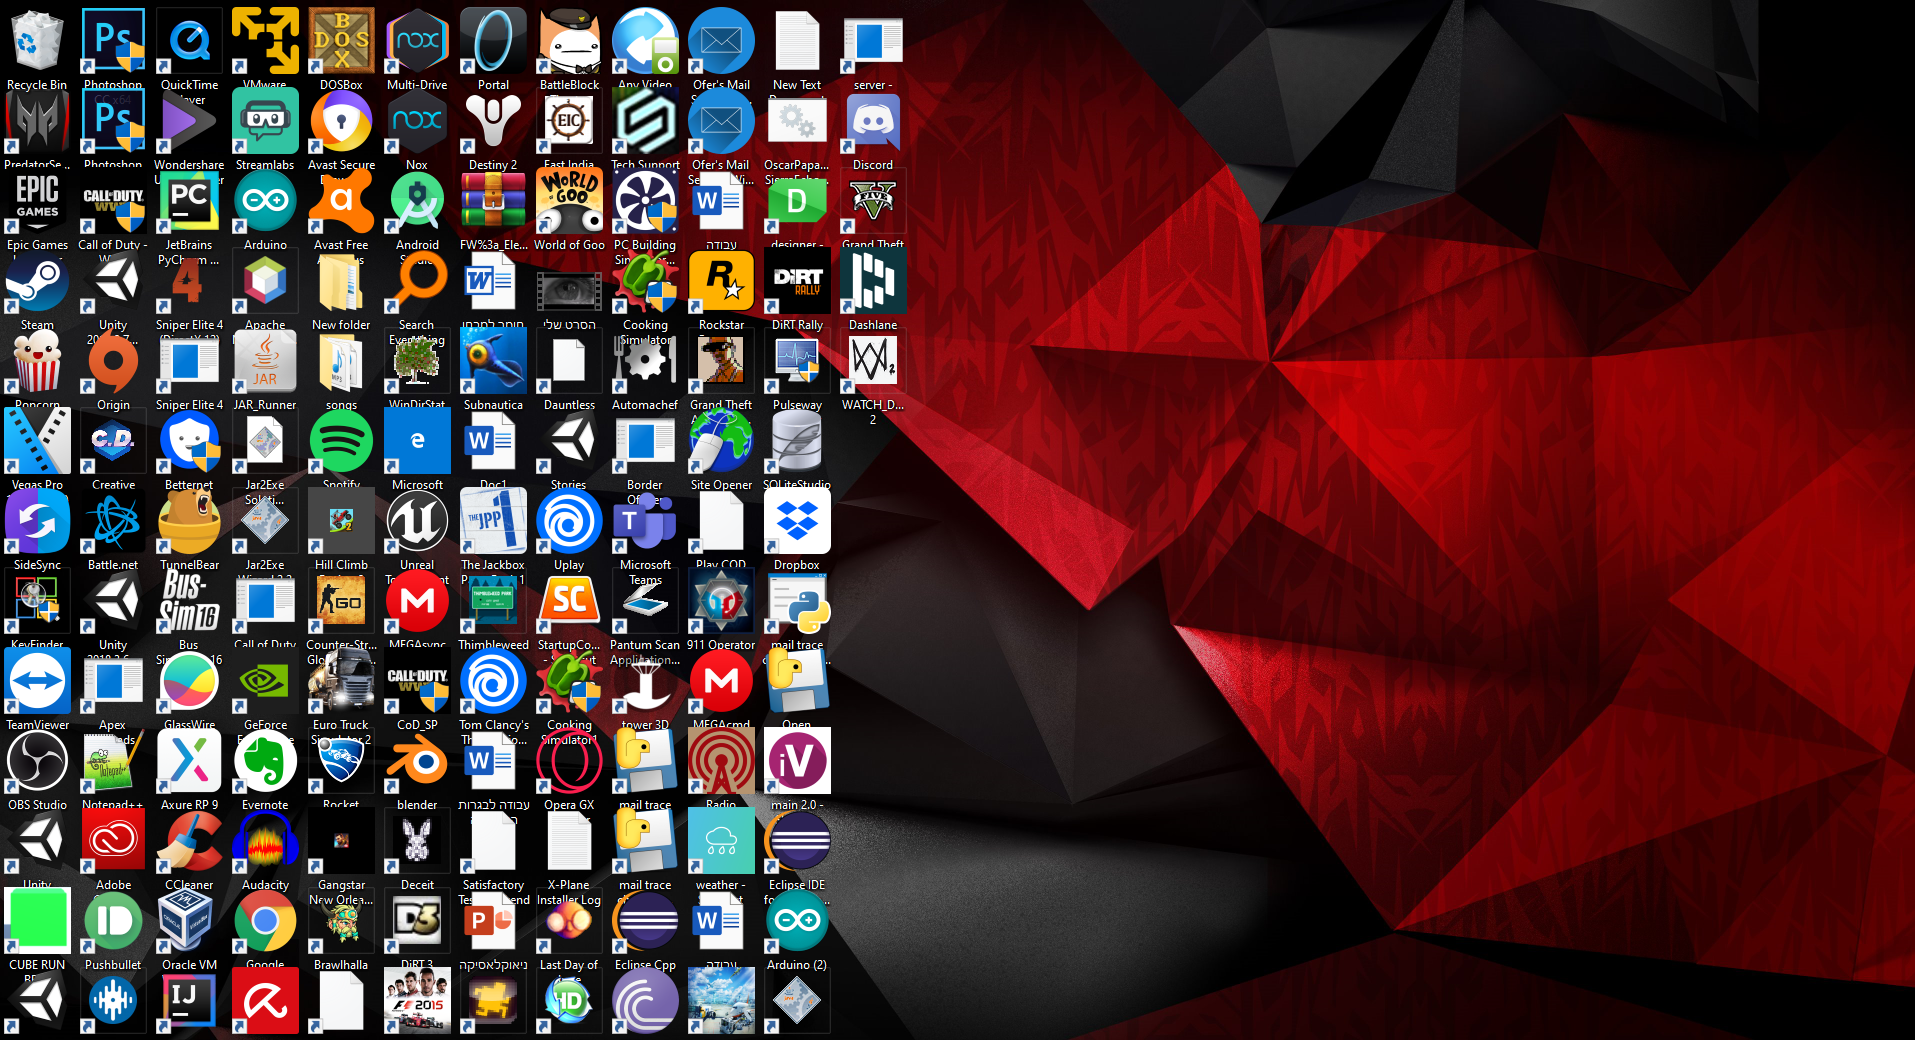 badge Expensive Industrial My desktop icons and layout changed, how to restore to - Microsoft Community